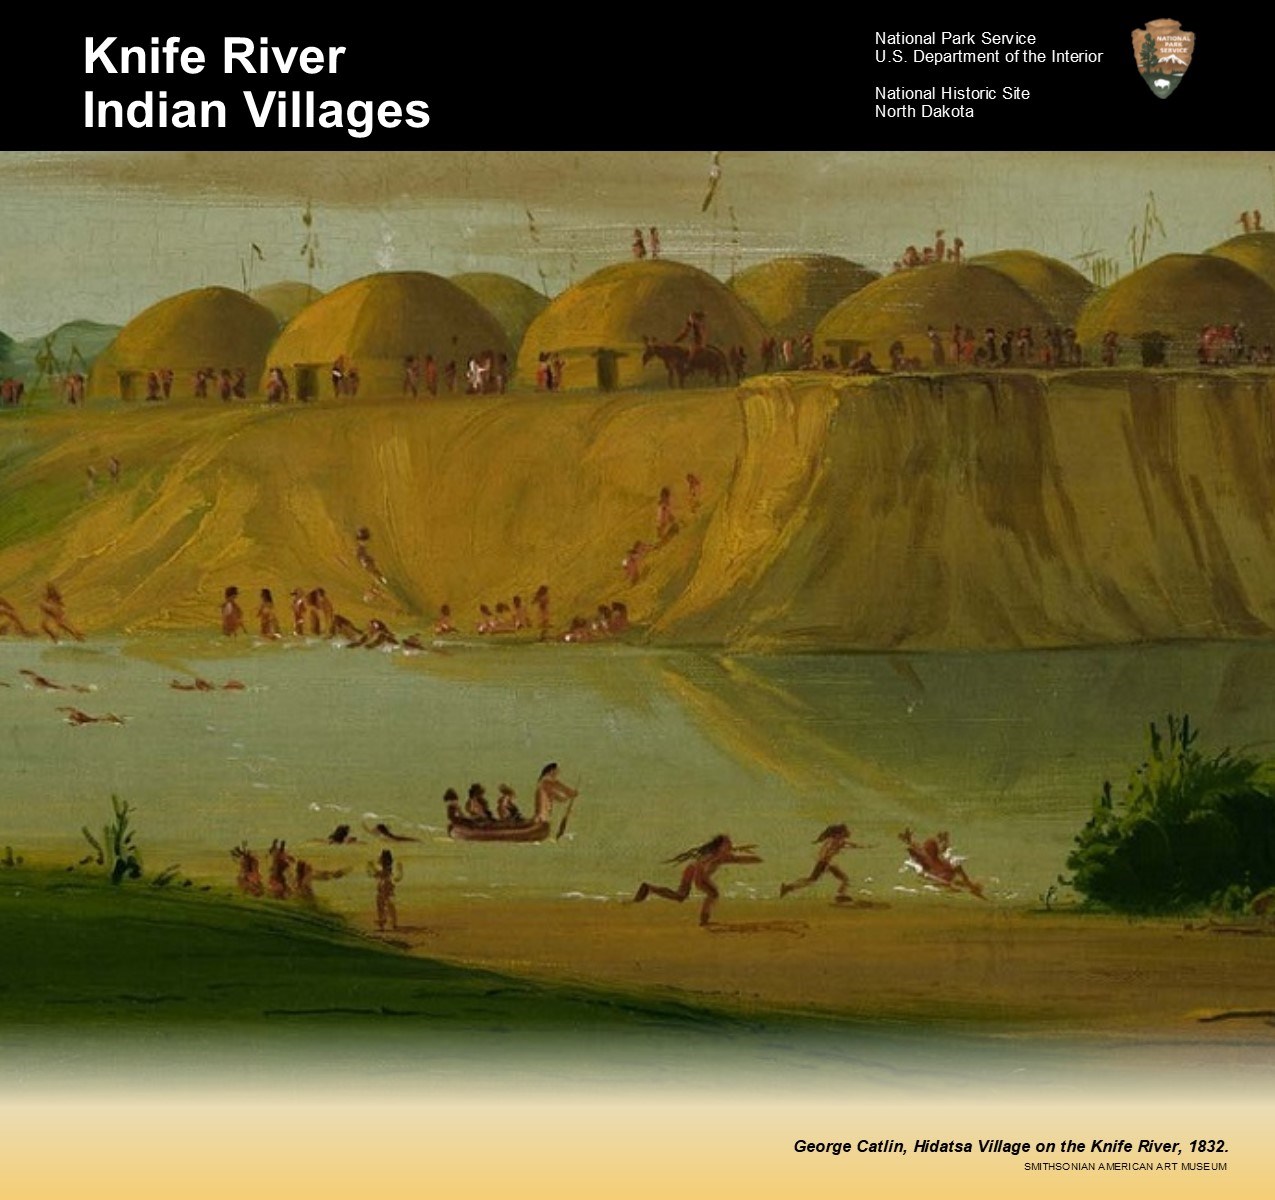 A painting of earthlodges above a river where native americans engage in various activities near the water.  Text reads: Knife River Indian Villages National Park Service U.S. Department of the Interior National Historic Site North Dakota